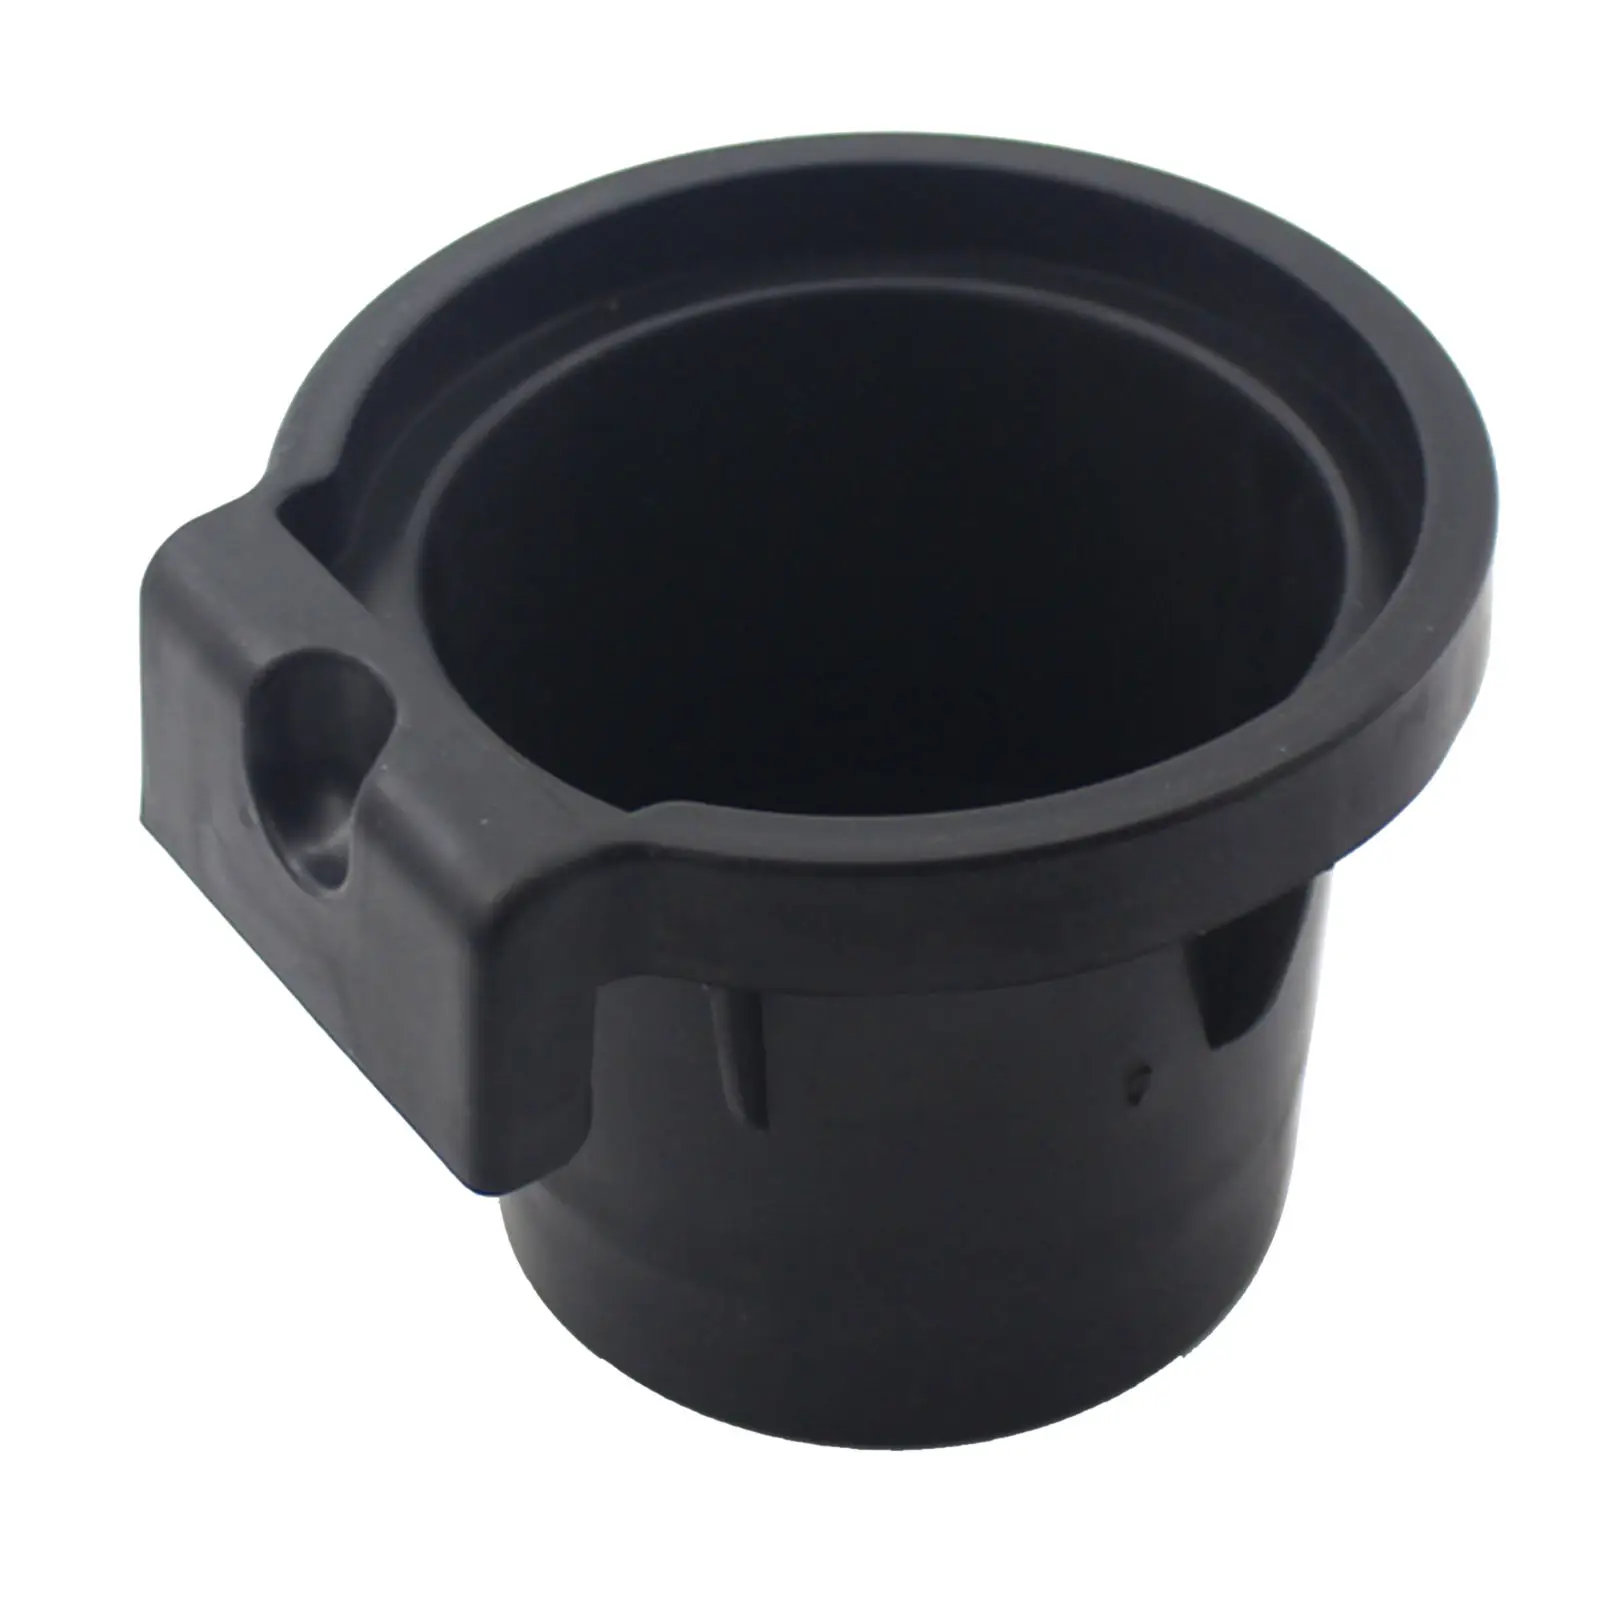 Cup Holder Inserts for 2005-2019  Frontier 2005-2012  2005-2015 Xterra Cup Holders